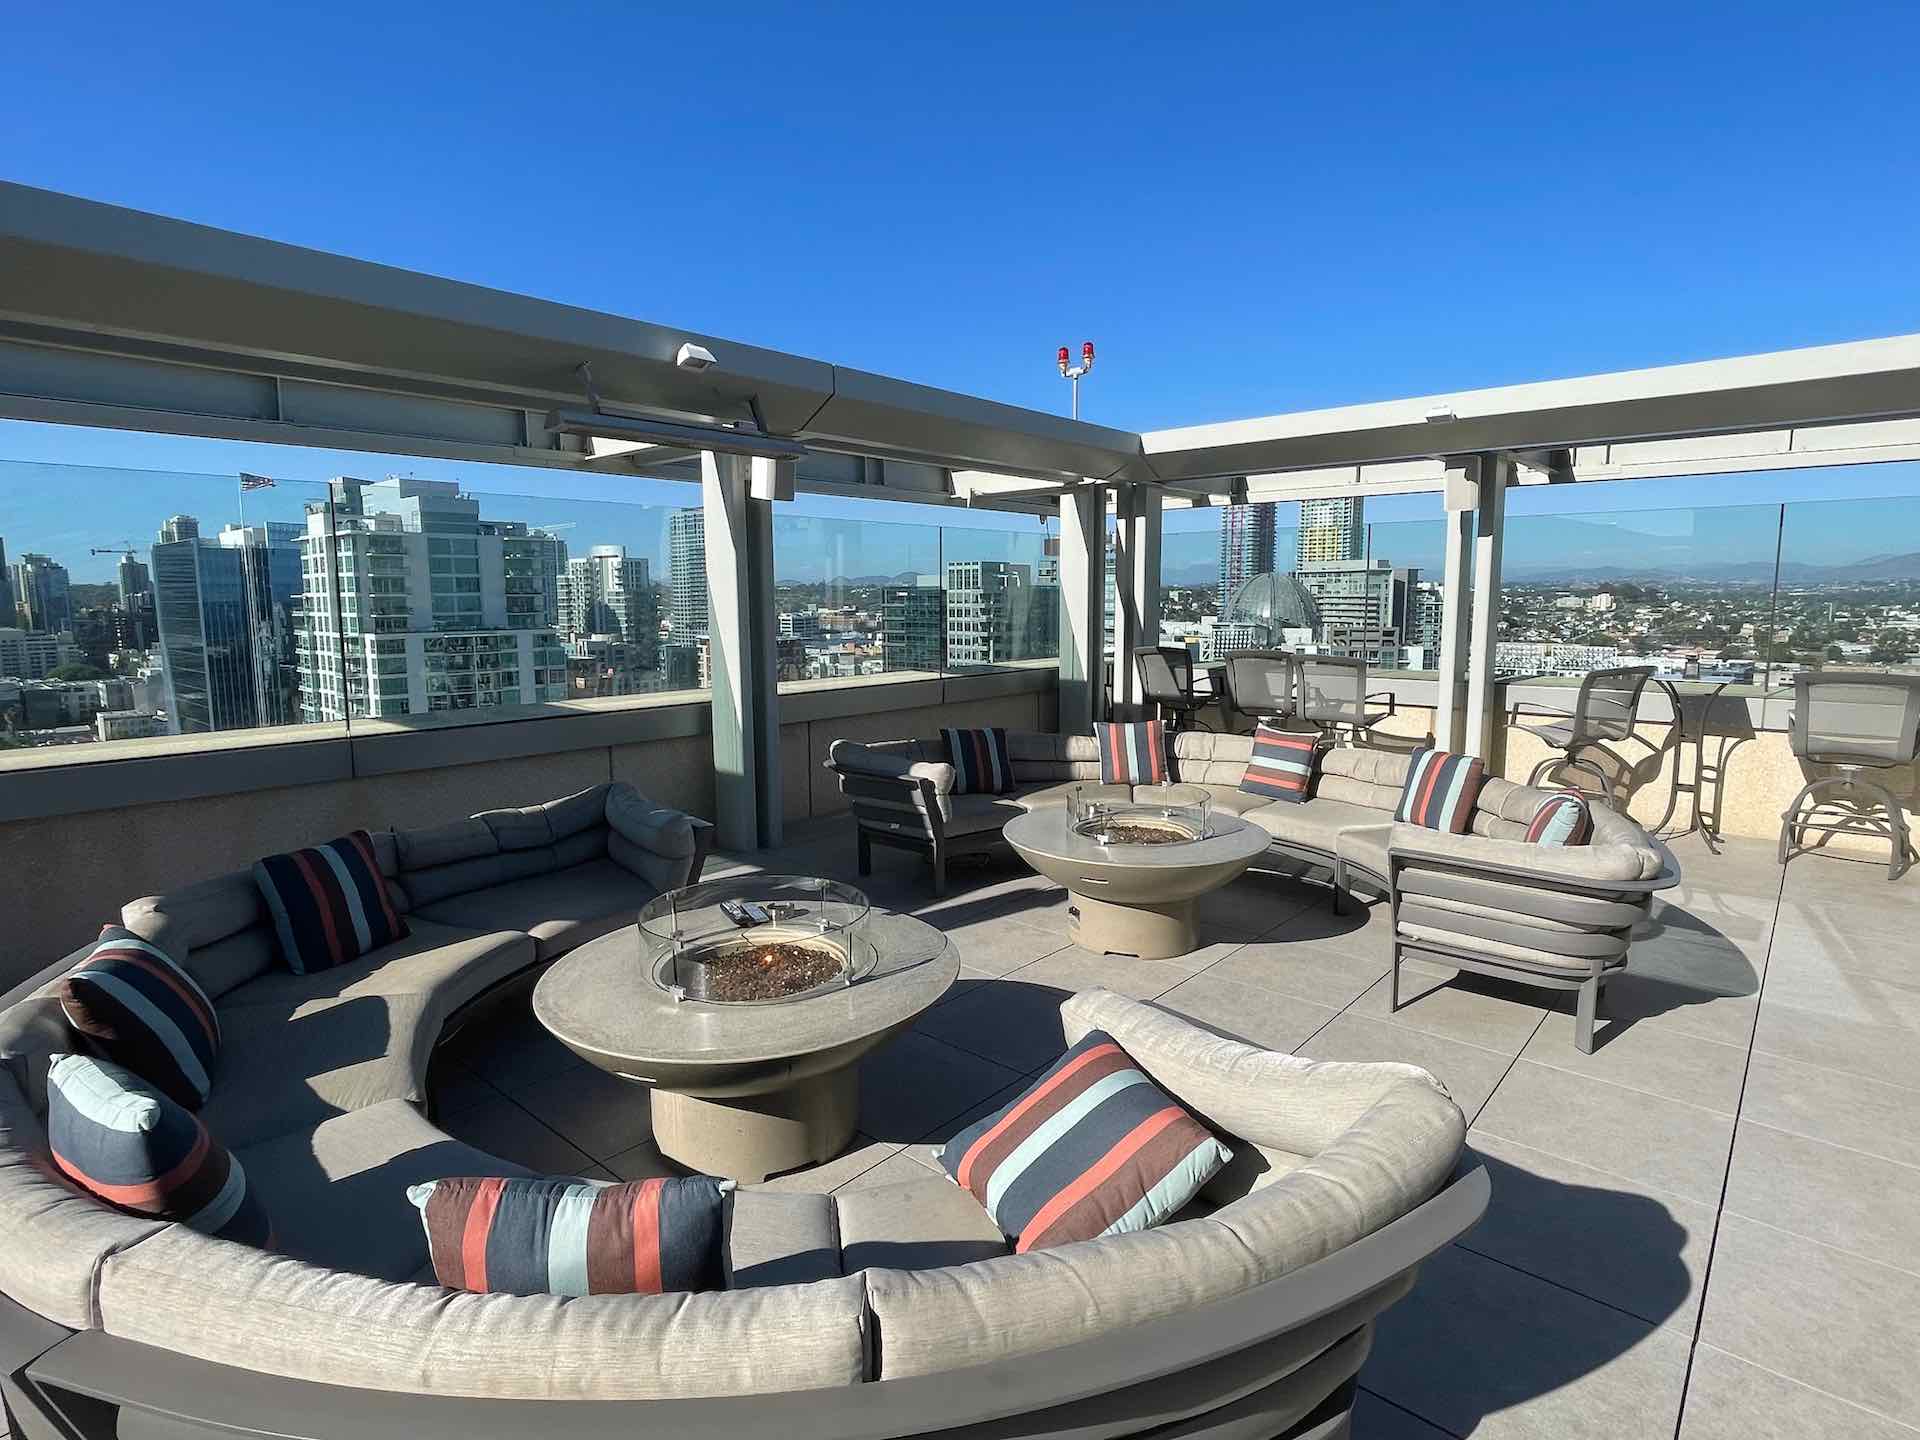 Fire pit seating area next to pool deck in downtown San Diego condo building